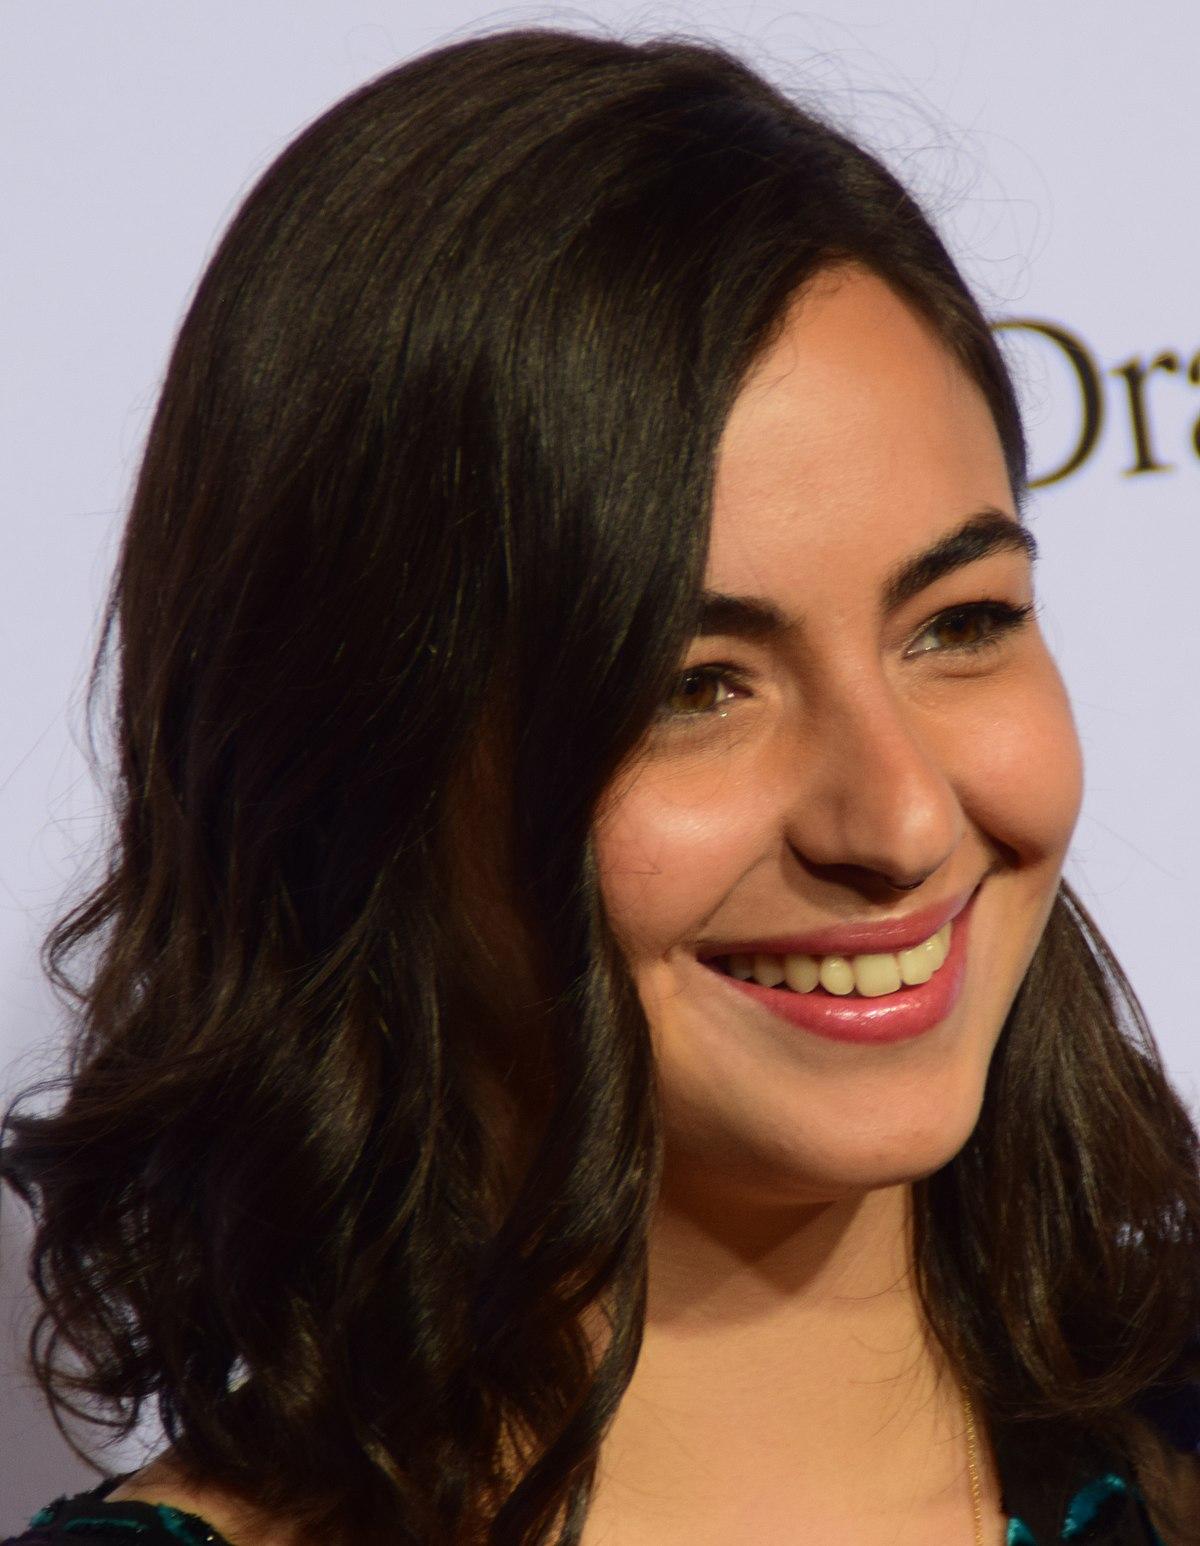 70+ Hot Pictures Of Alanna Masterson Which Are Here To Rock Your World 56